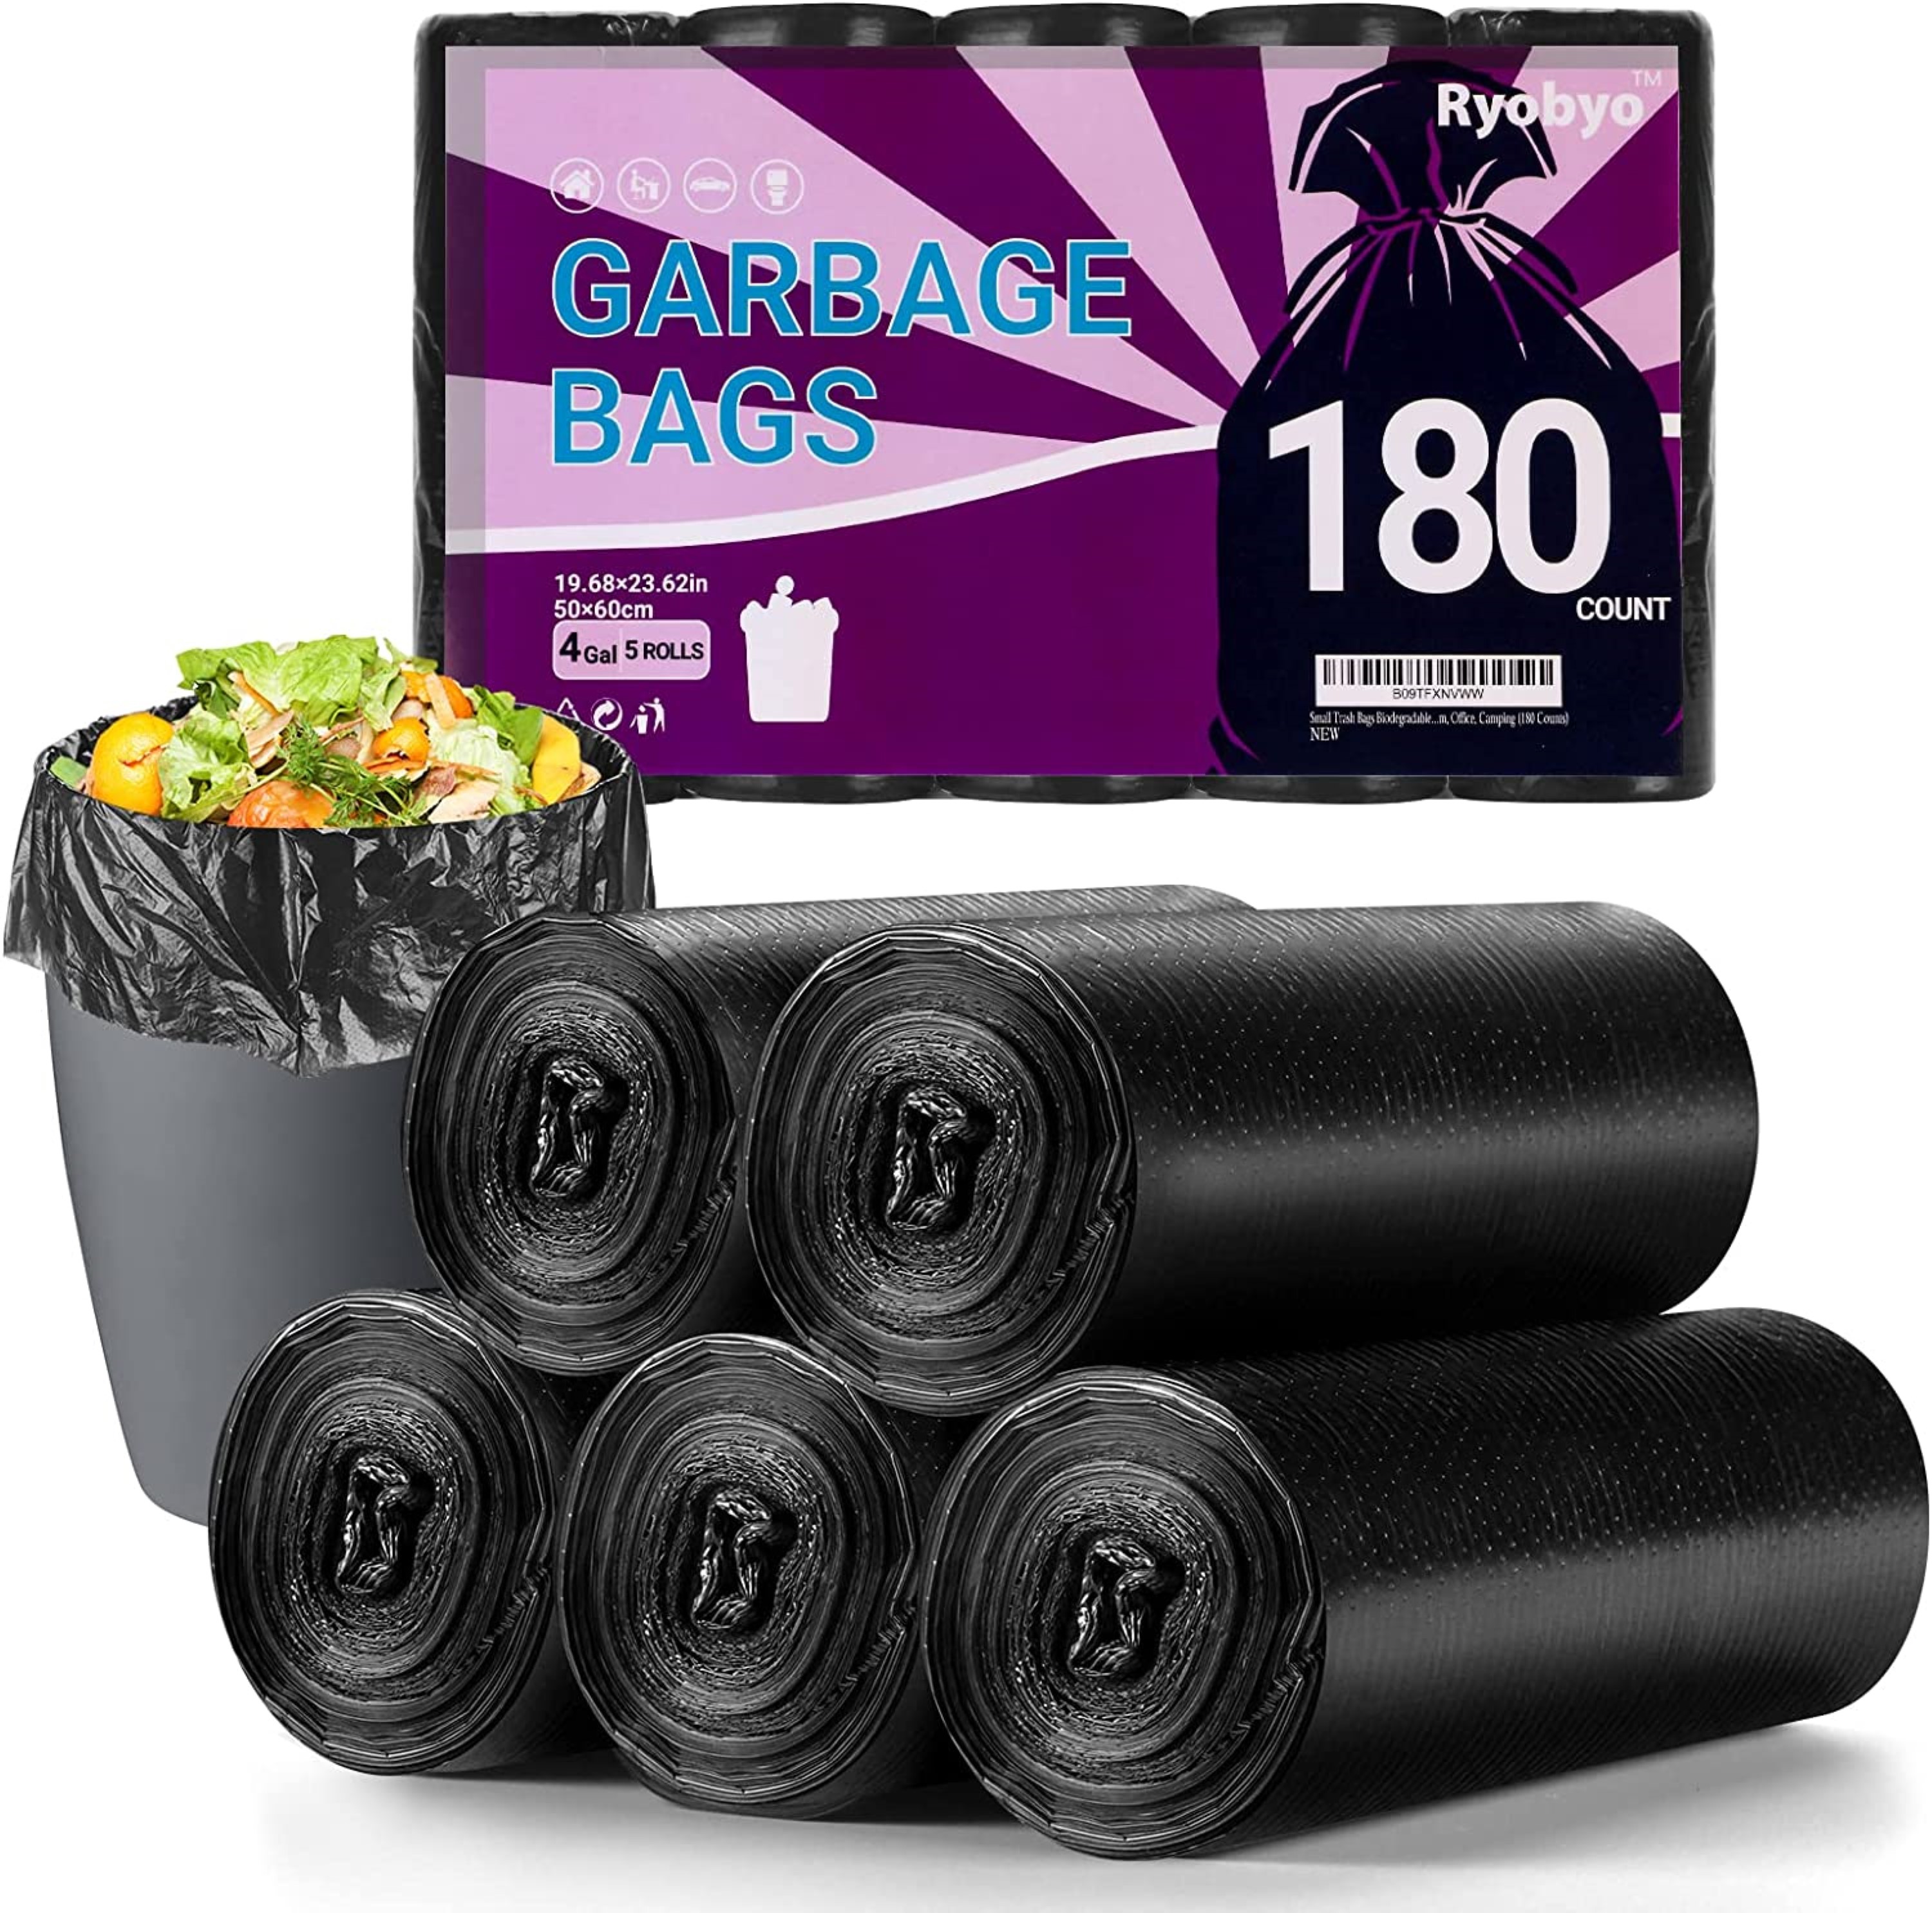 Small Trash Bags 3-5 Gallon, Inwaysin 200 Count Small Bathroom Trash Bags  Black, Strong Small For Garbage, 4 Gallon Biodegradable, Unscented, Size